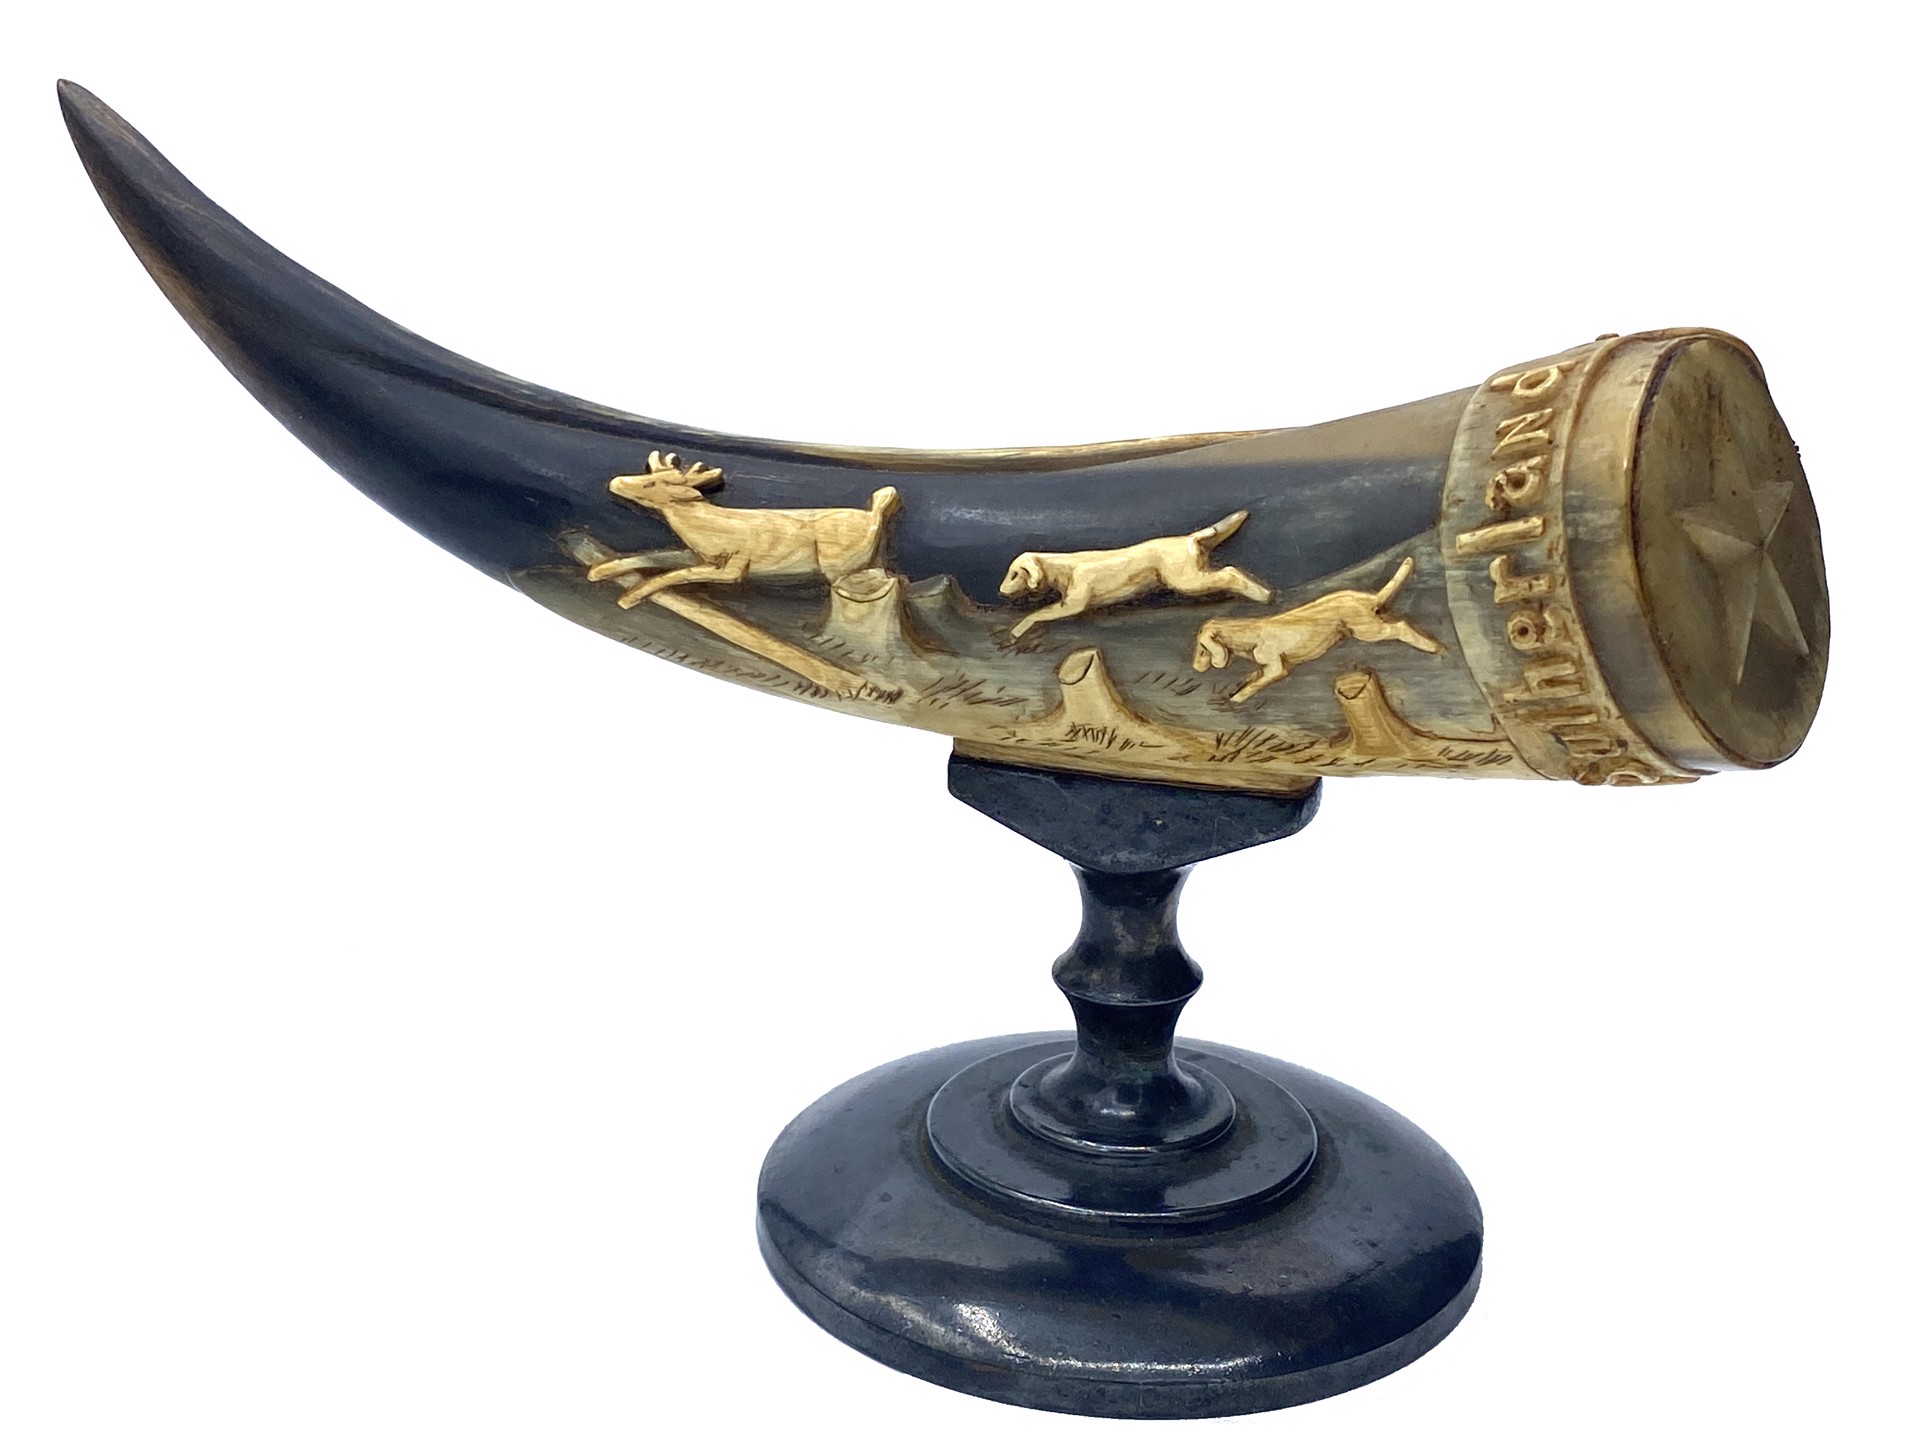 DS-79: small carved powder horn on silver plate stand - WD Sutherland, hunting scene, locomotive, masonic buckle with emblem, star enclosure by Dan Super